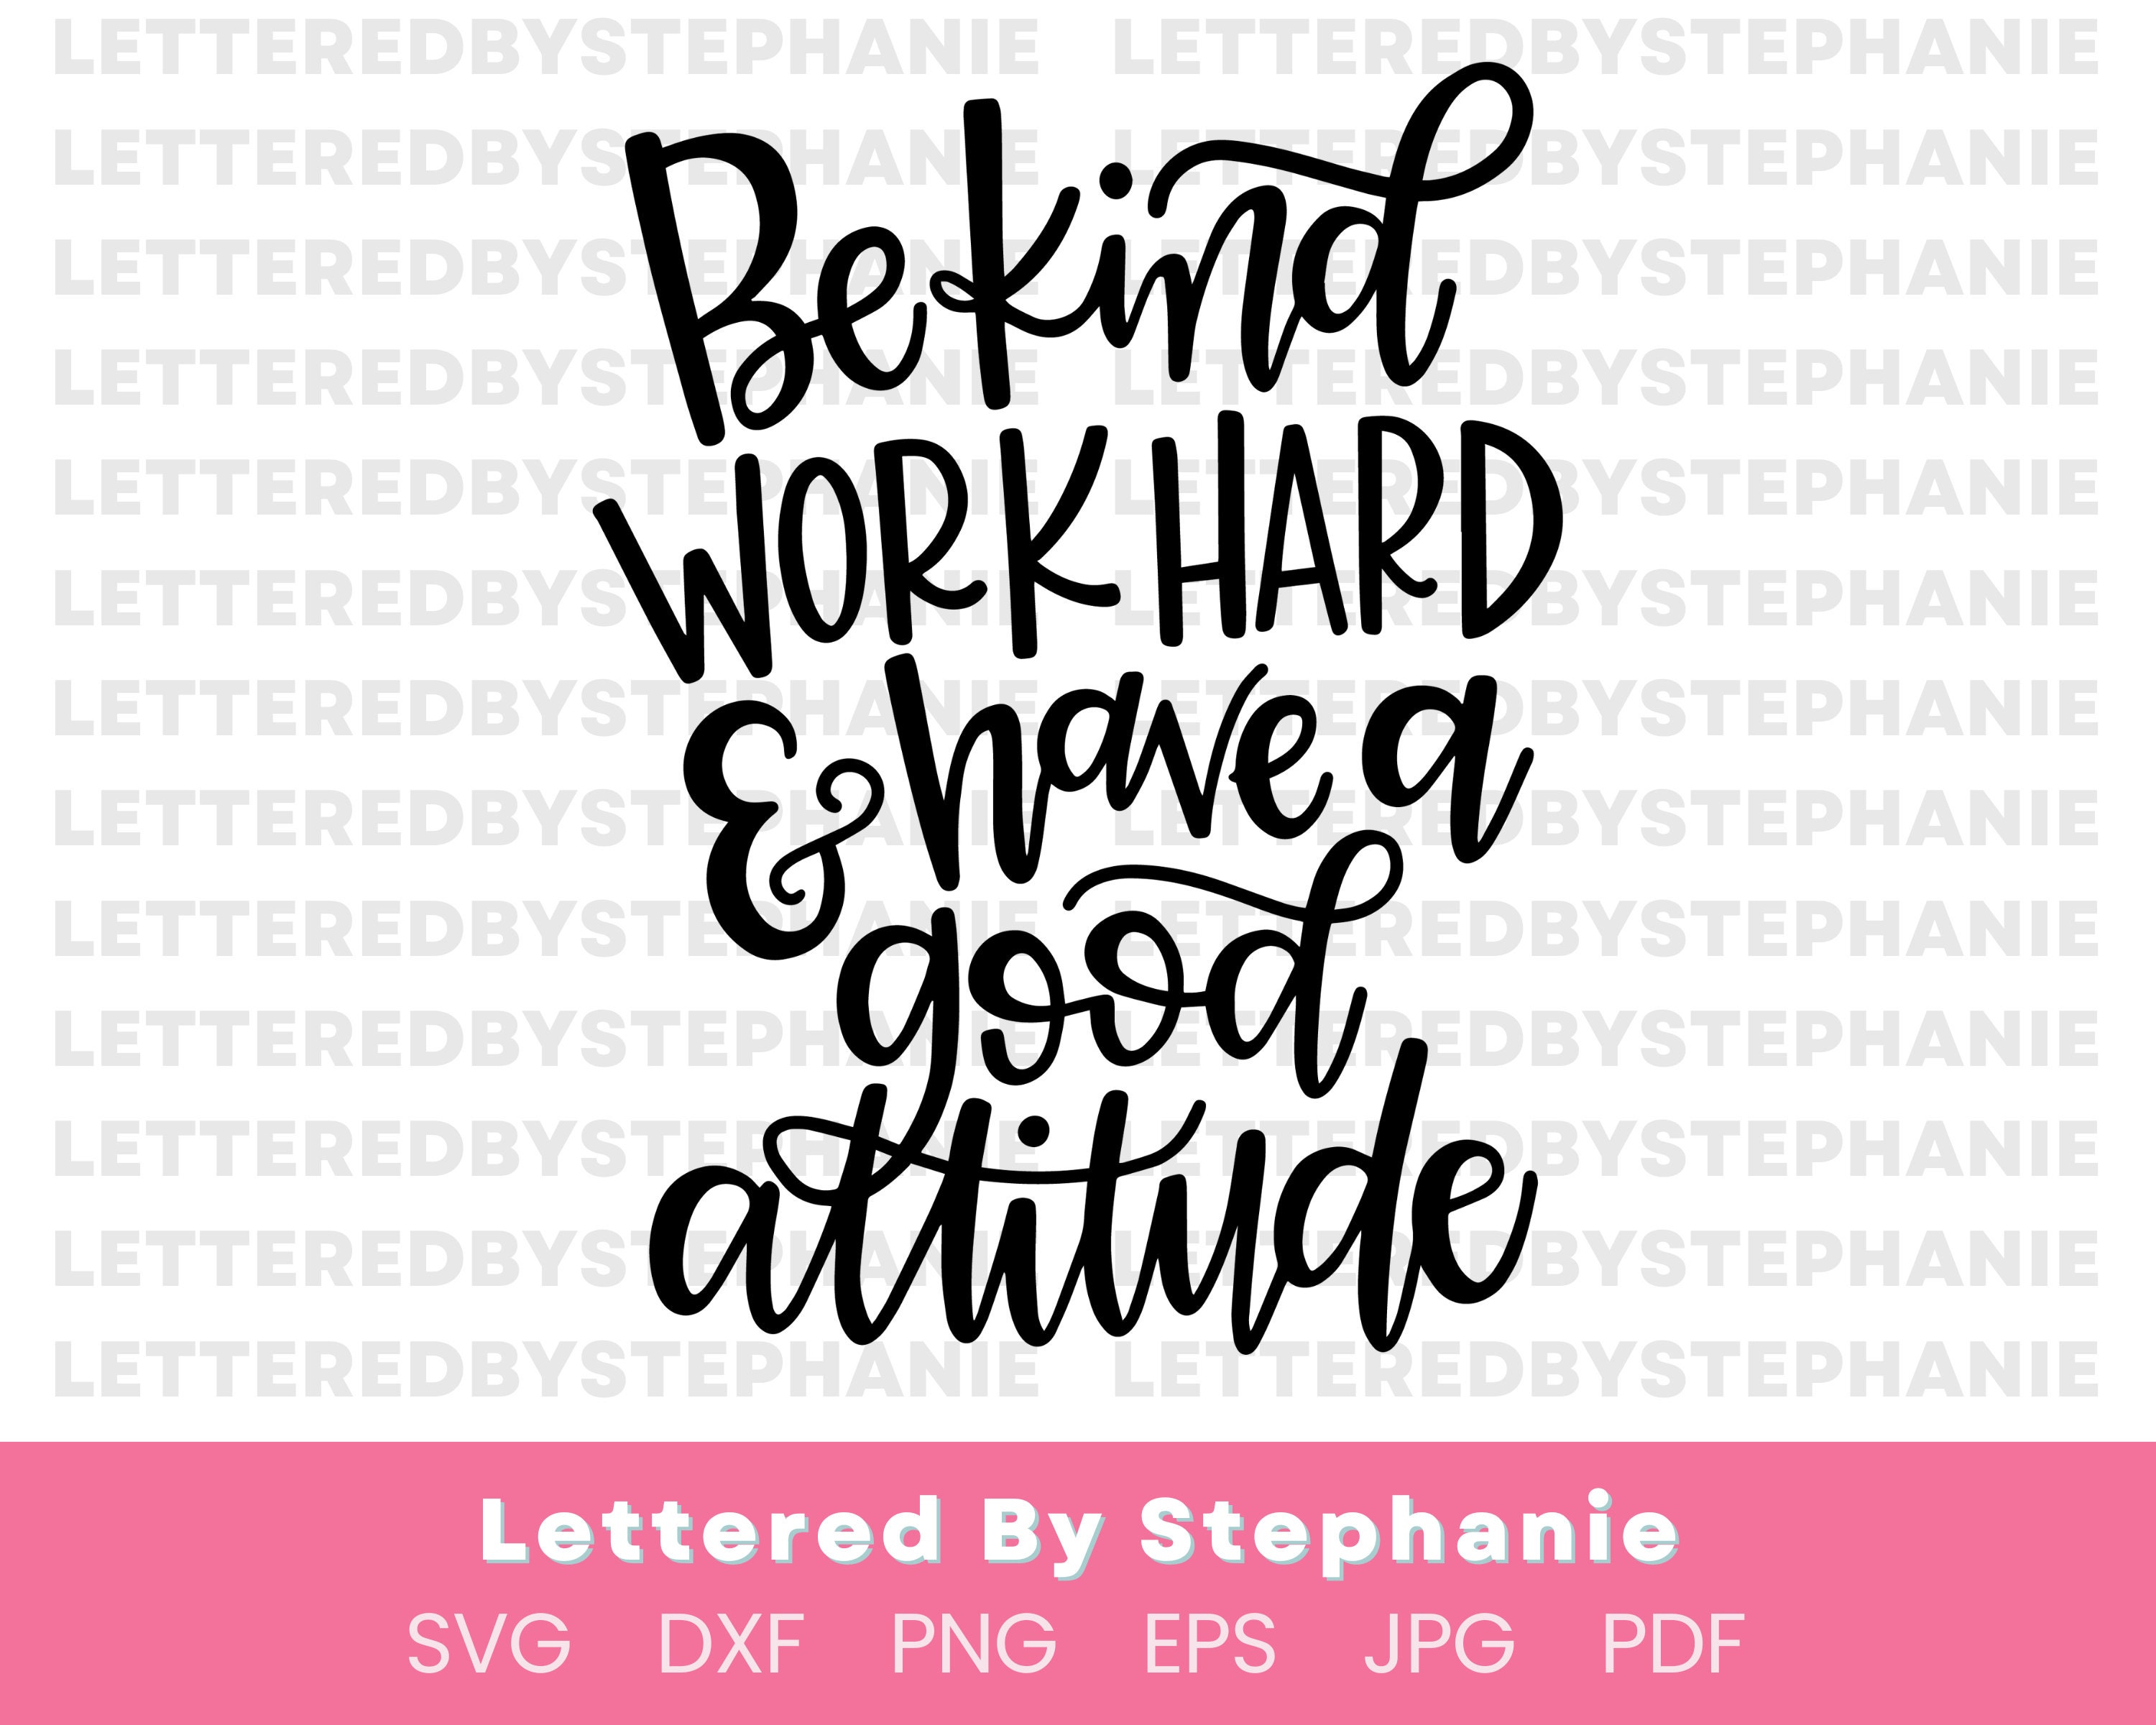 positive attitude quotes with images